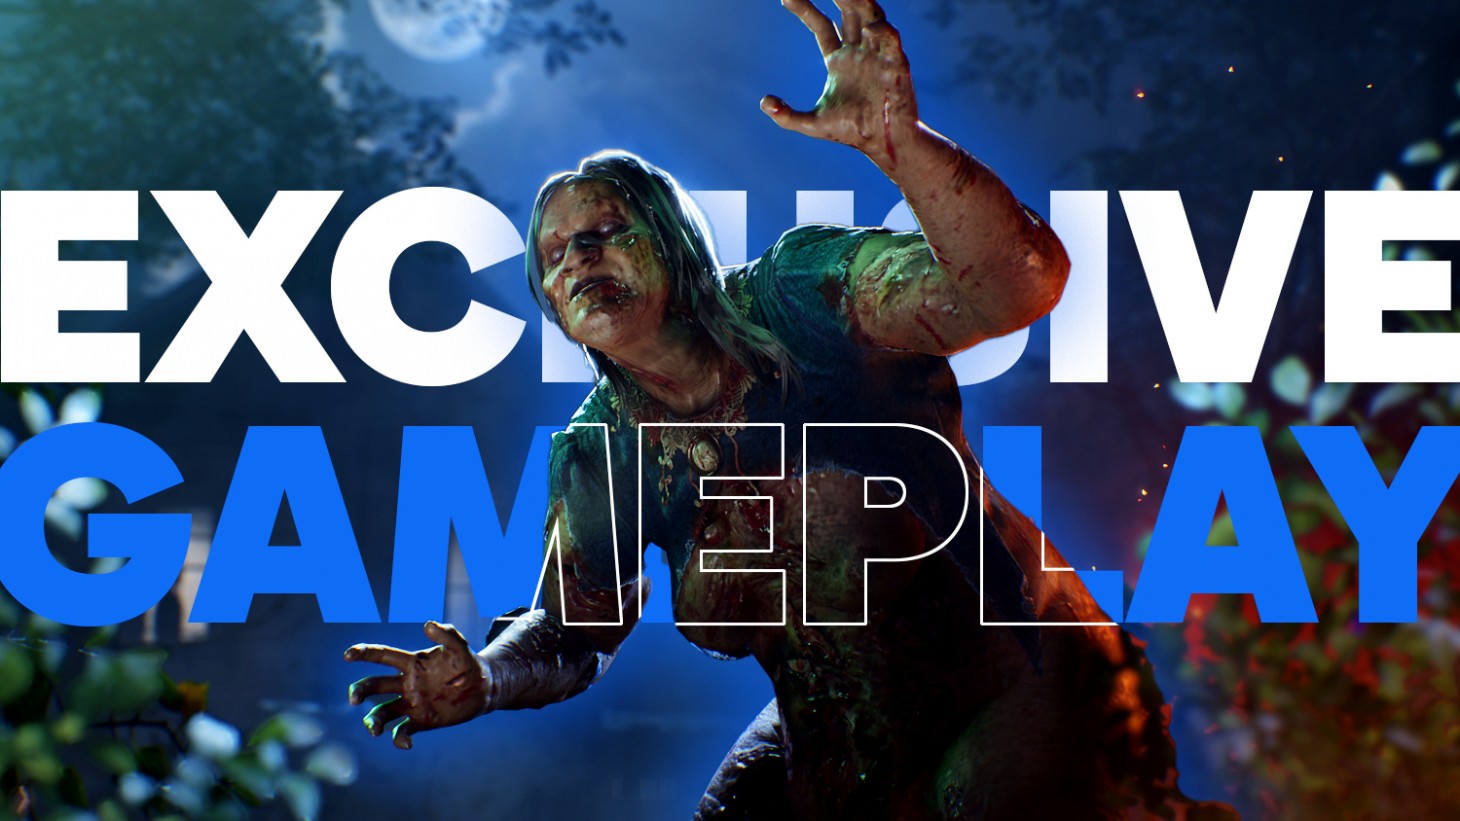 Evil Dead: The Game Is Getting New DLC In Early 2023 - Gameranx